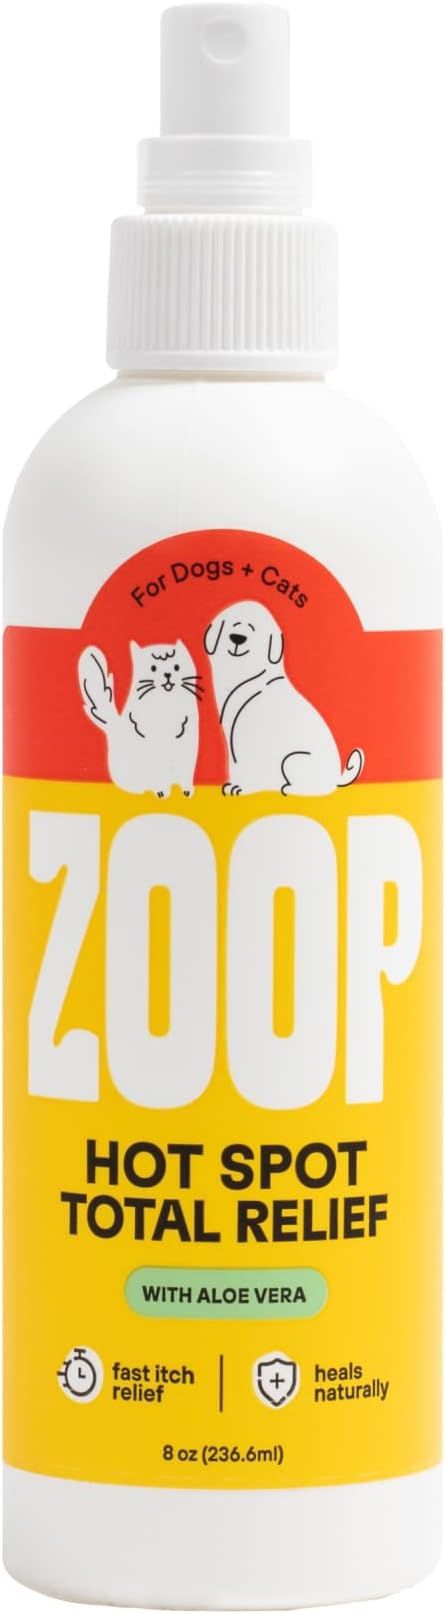 ZOOP Natural Dog Itch Relief Spray - Anti Hot Spot, Itchy Skin, & Skin Irritation for Dogs & Cats... | Amazon (US)